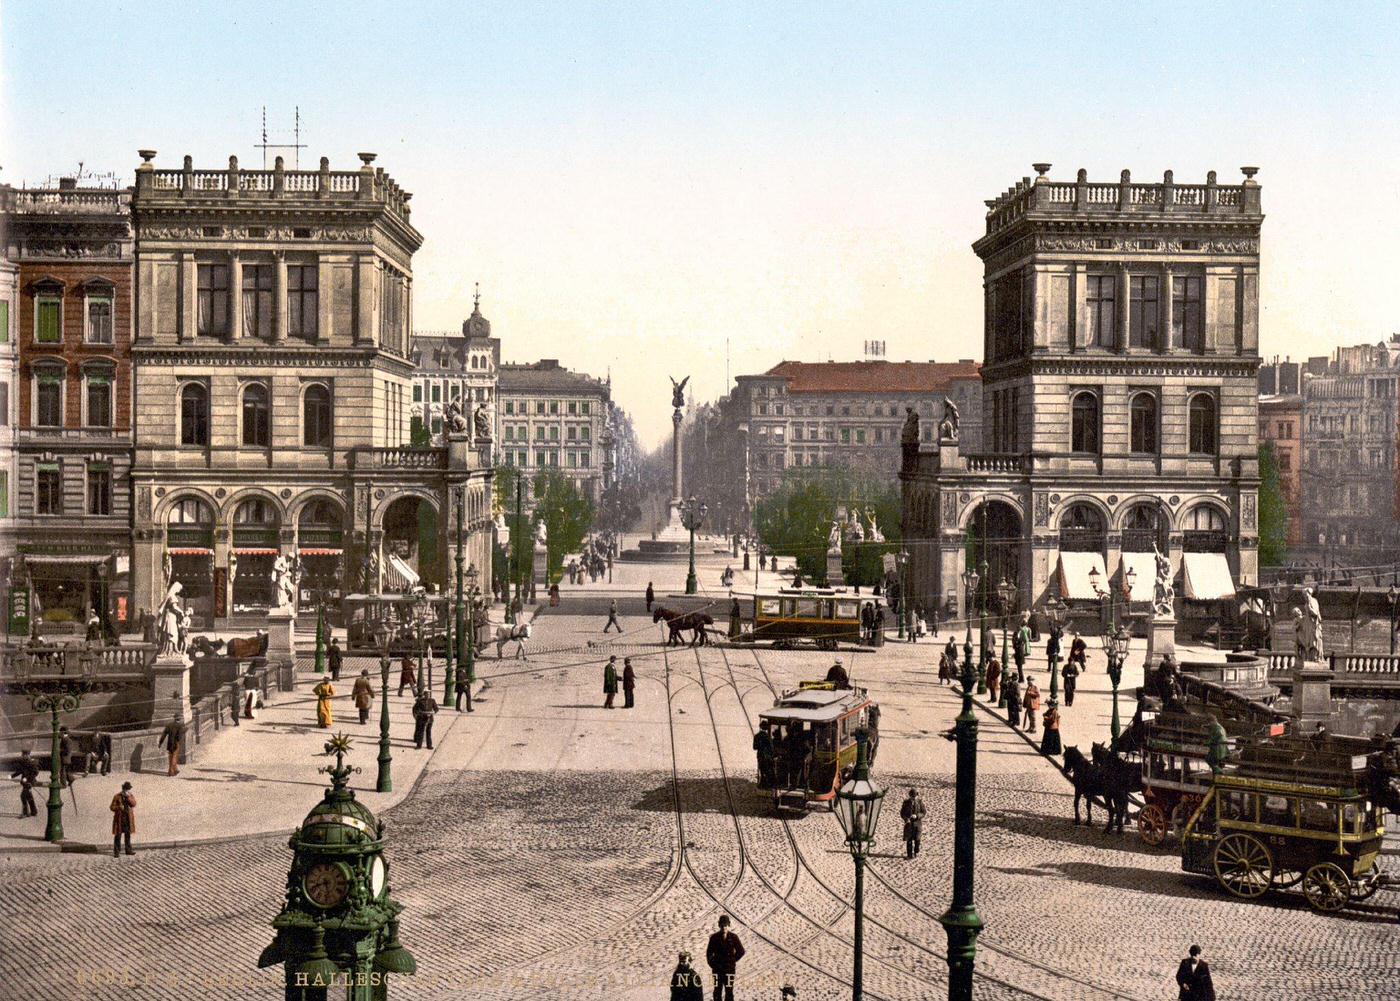 Horsedrawn trams at the Halle Gate and Belle Alliance Square, Berlin, 1890s